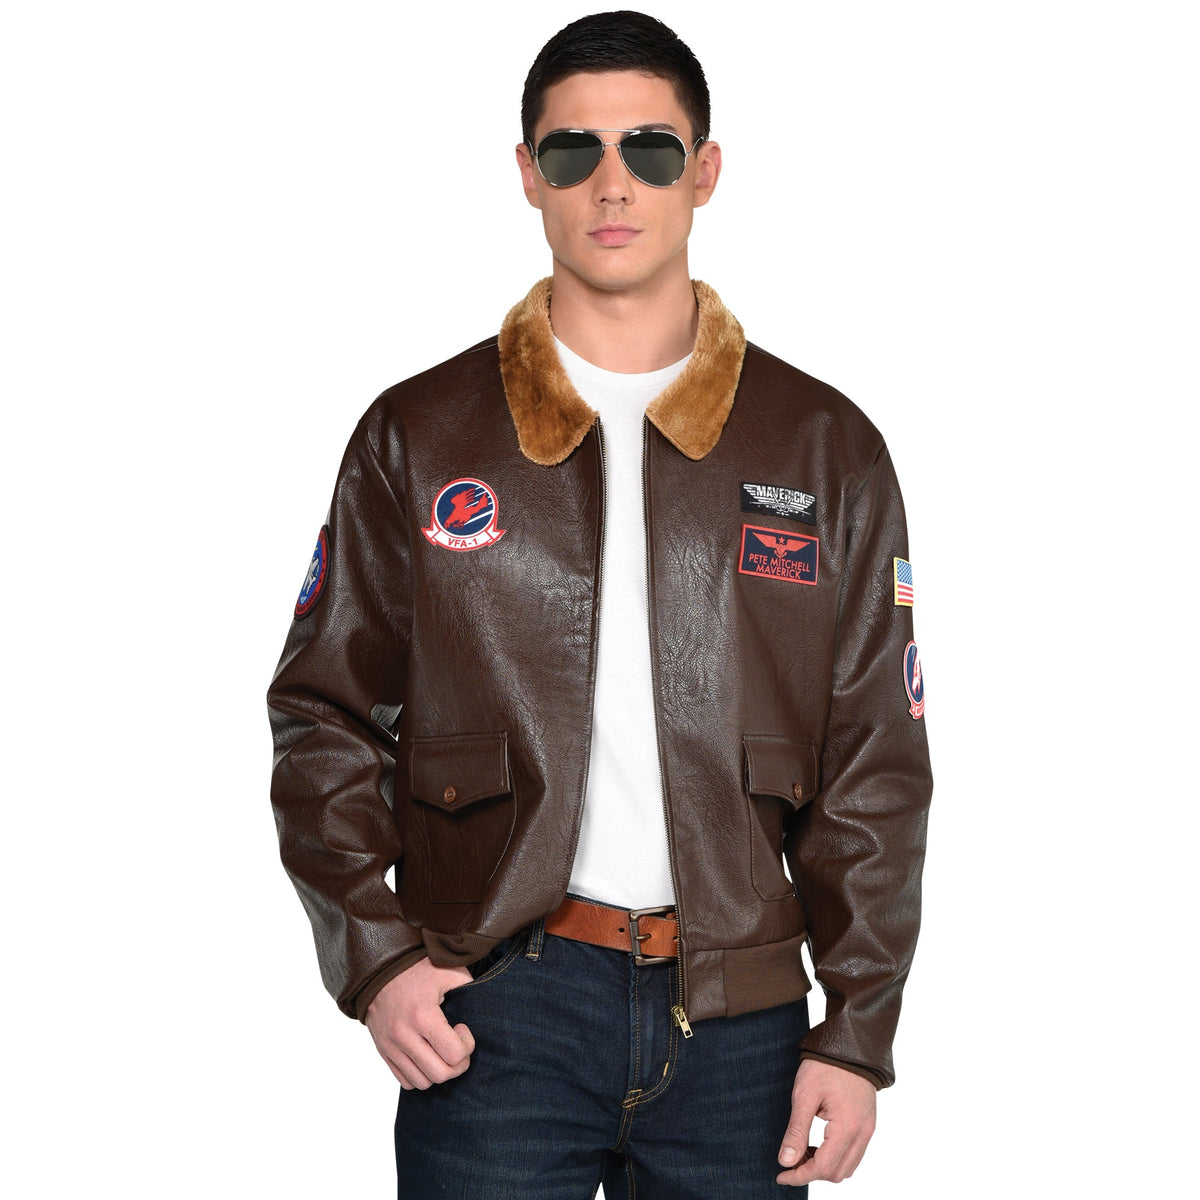 SUIT YOURSELF COSTUME CO. Costume Accessories Top Gun Maverick Bomber Jacket for Adults 192937040942